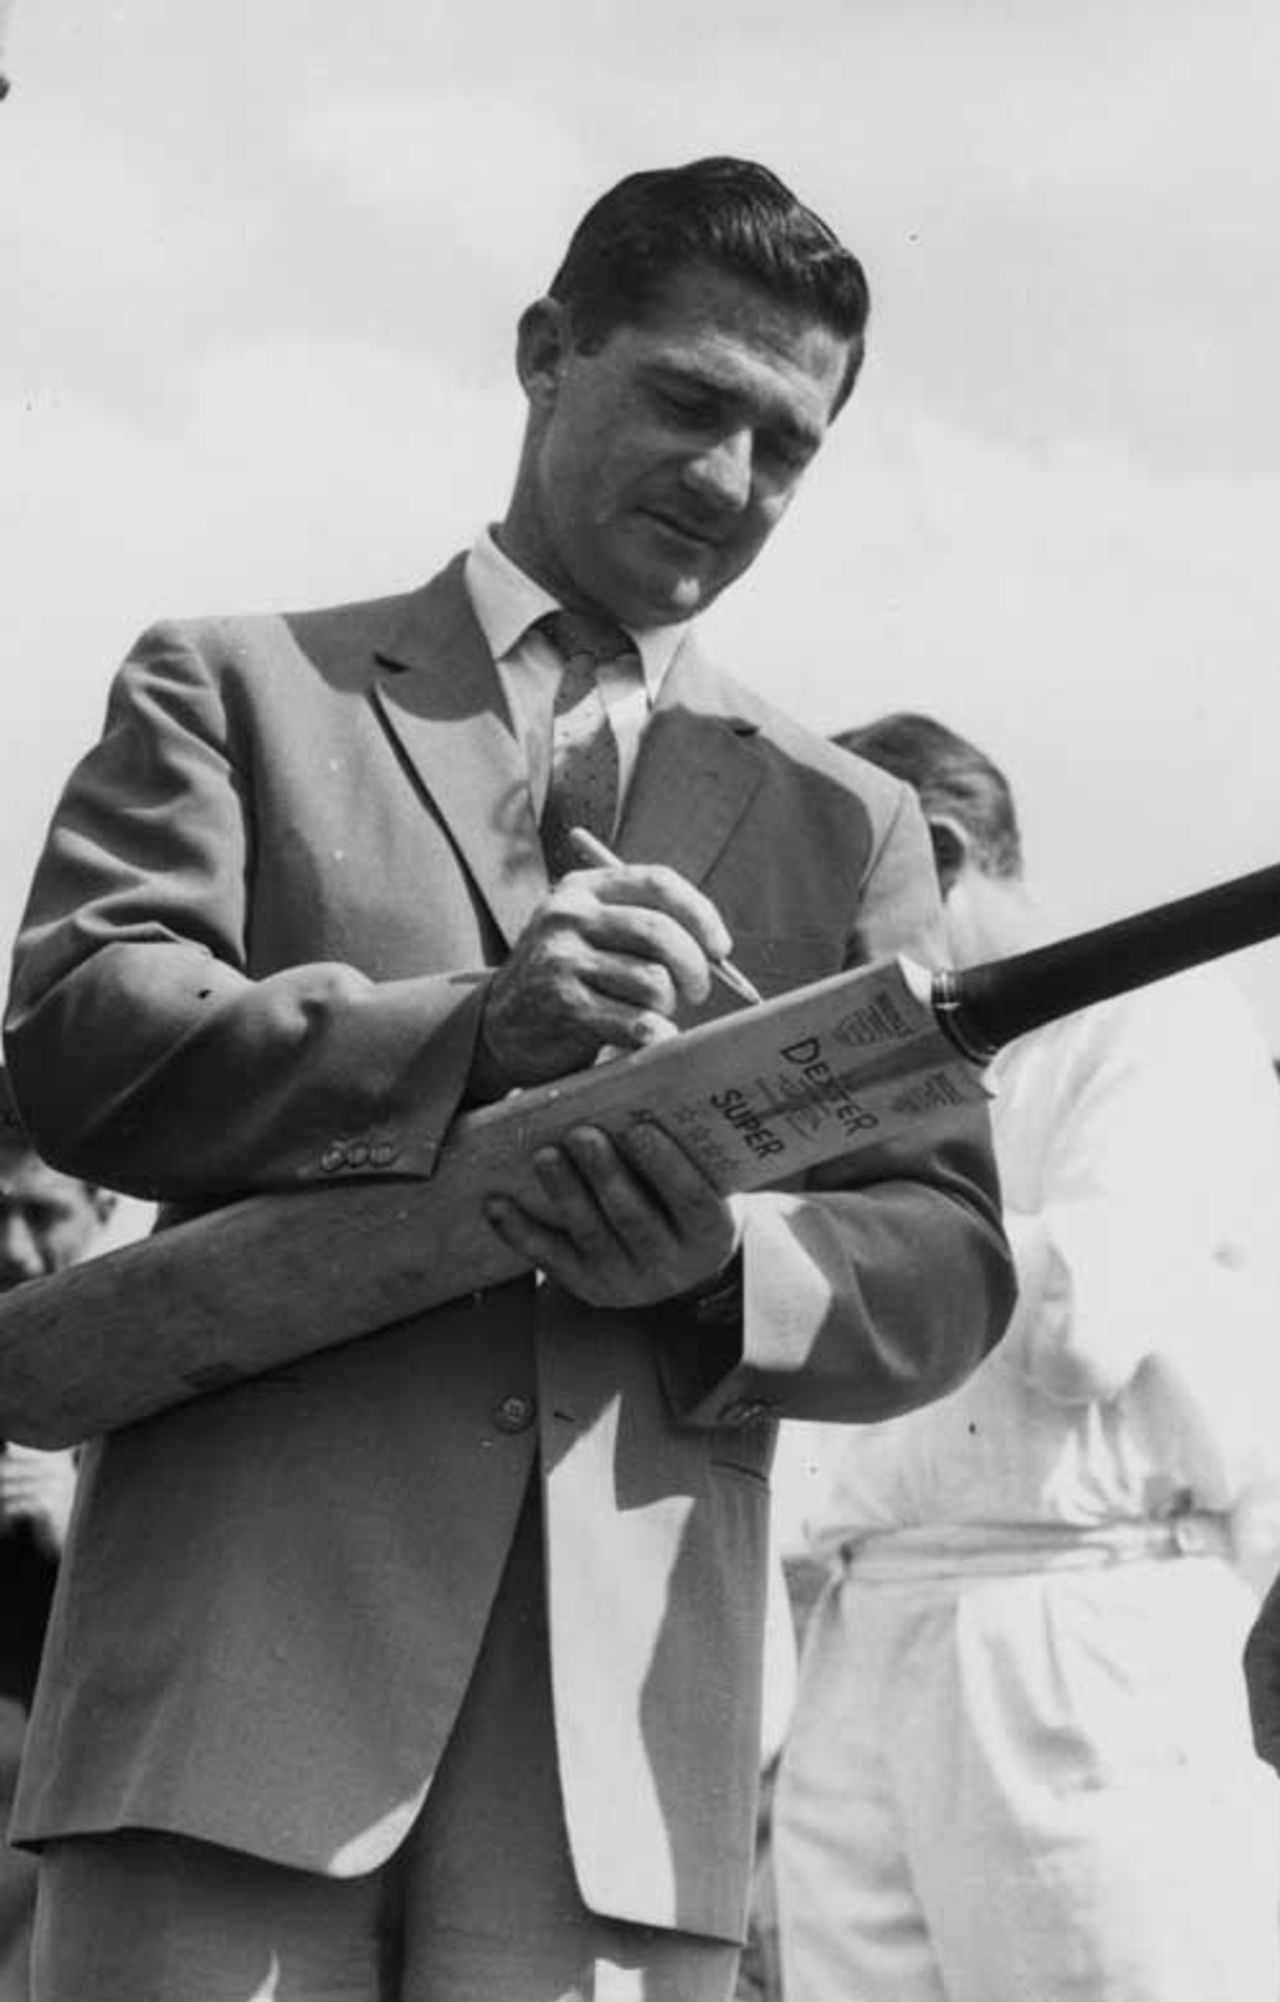 Neil Harvey autographs a cricket bat during a visit to the Governor General of Australia, at his home in Penhurst